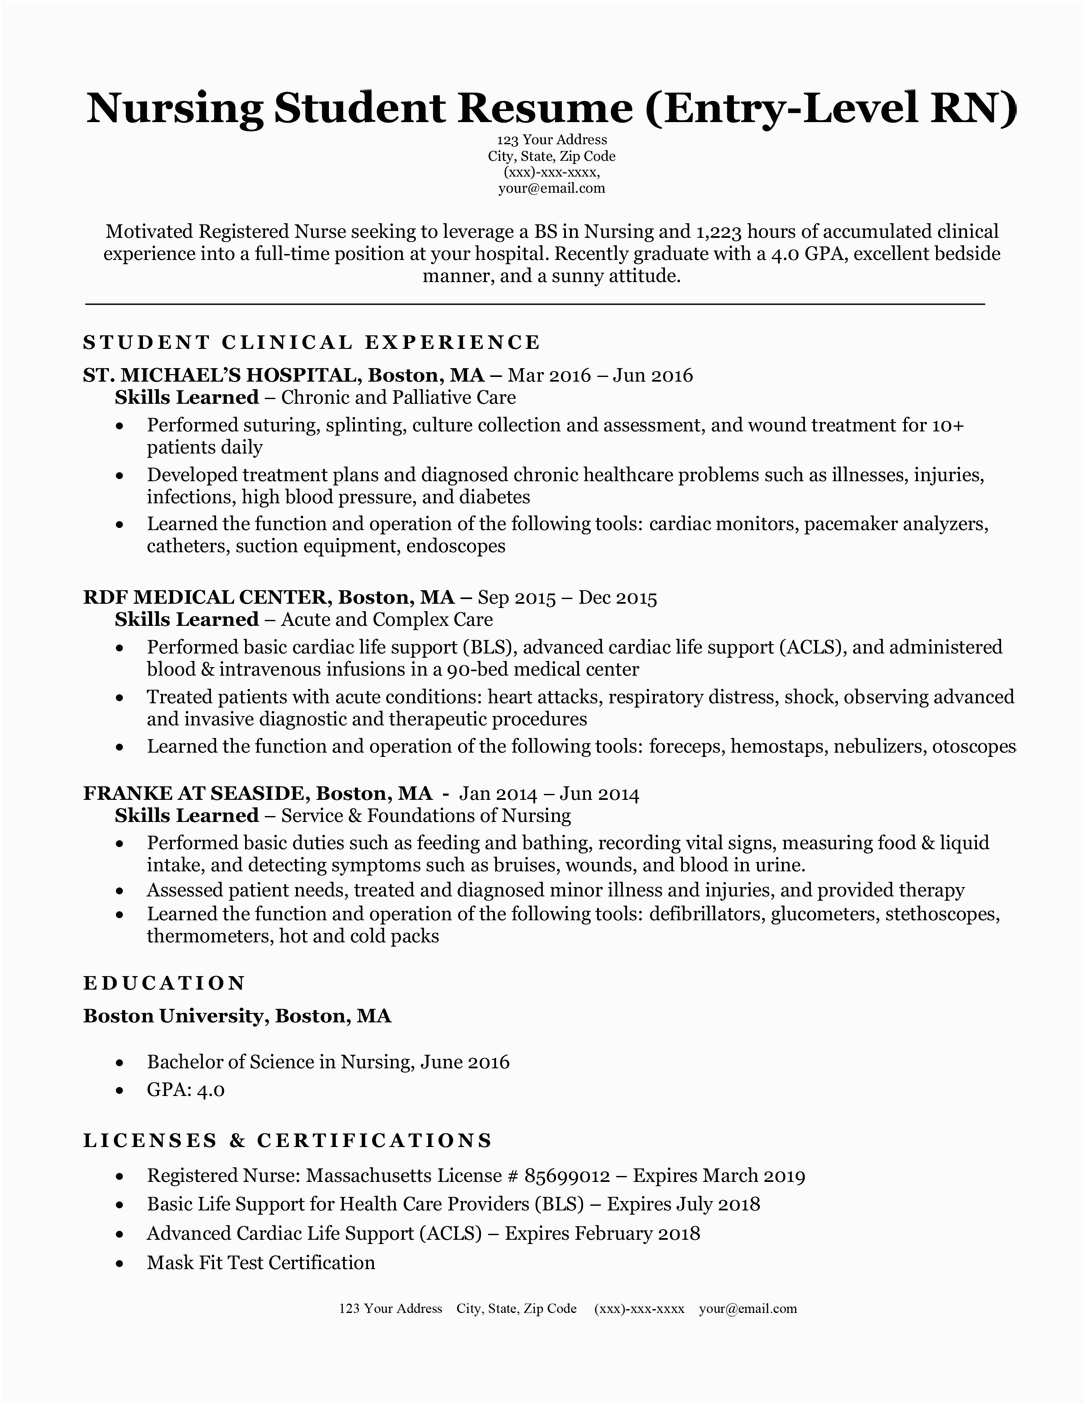 Sample Resume for Nurses with No Experience Nursing Student Resume with No Experience Database